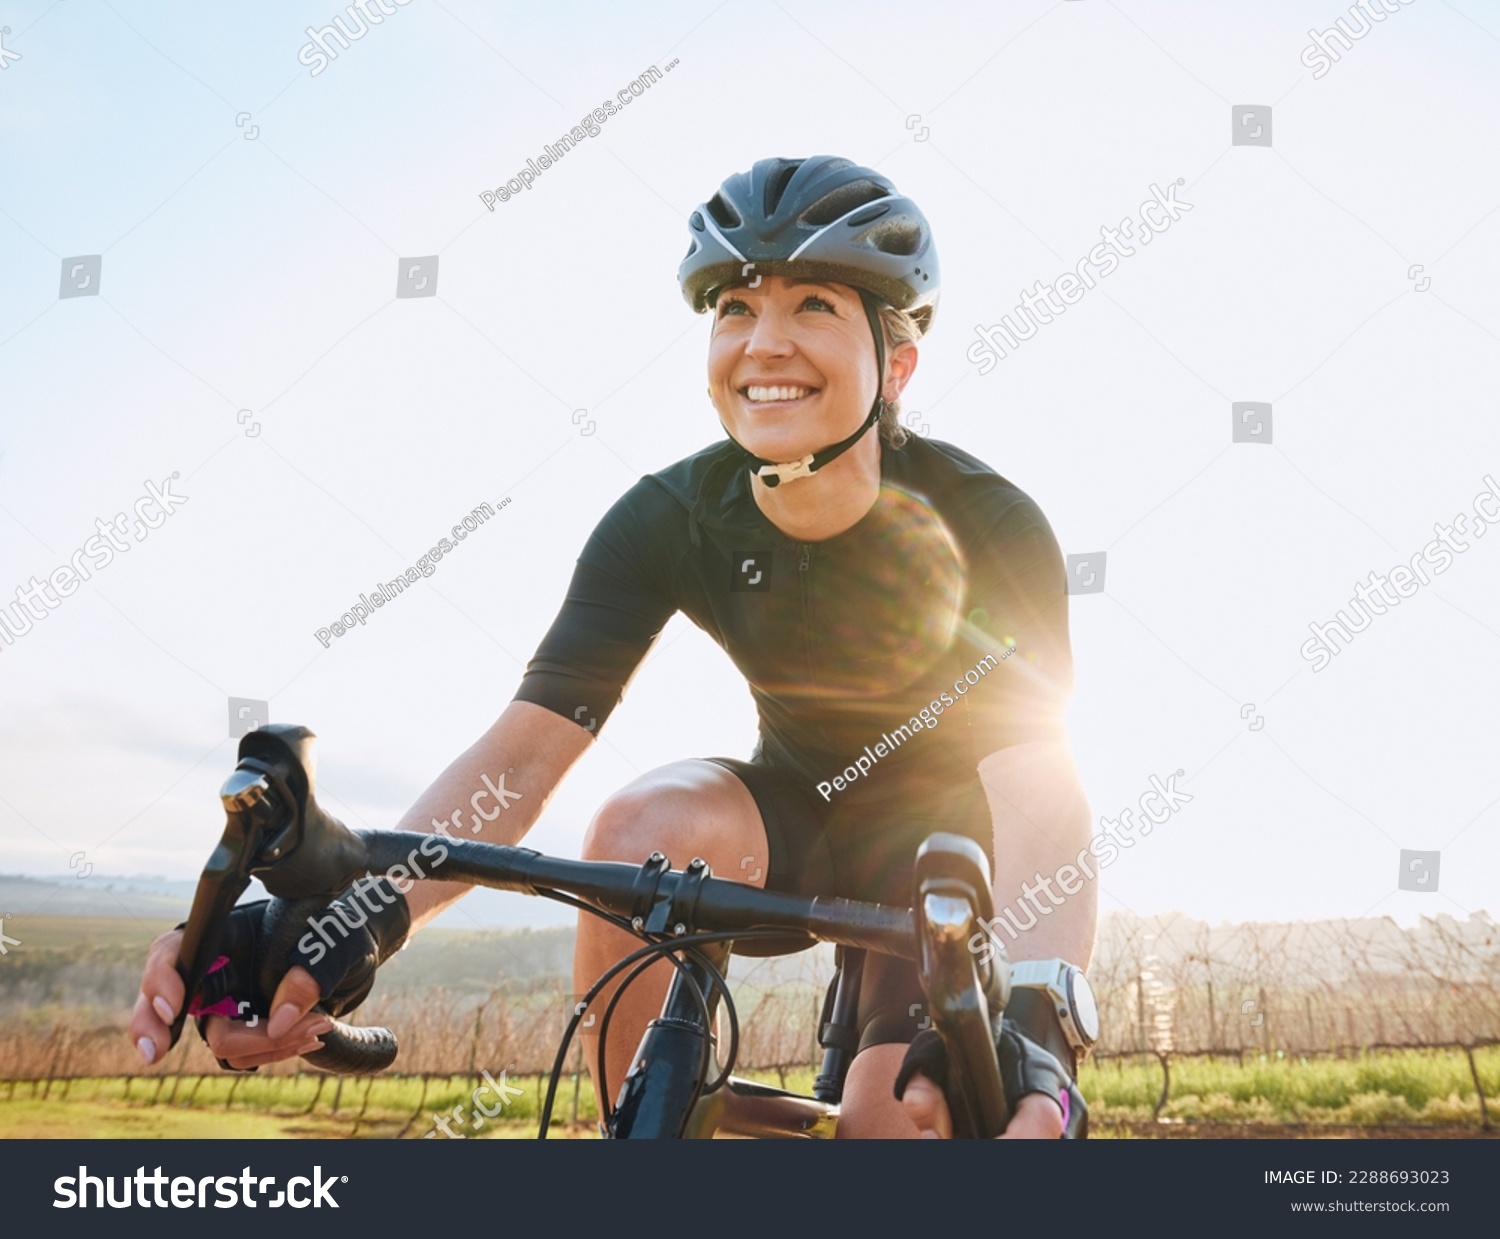 Cycling, fitness and happy with woman in park for training, workout and cardio health. Exercise, travel and freedom with female cyclist riding on bike in nature for adventure, journey and transport #2288693023